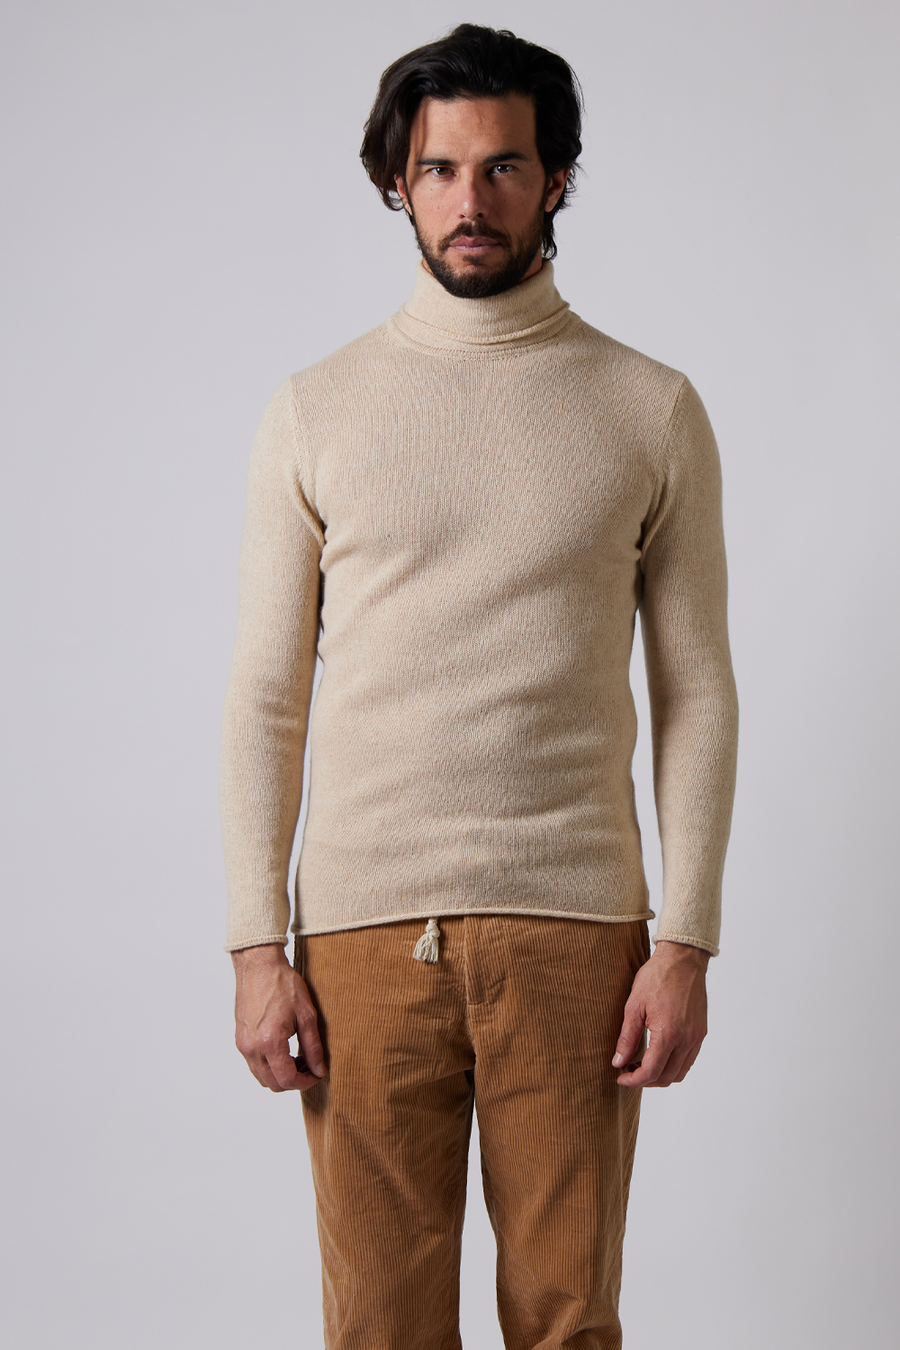 Buy the Daniele Fiesoli Loose Turtle Neck Sweater Beige at Intro. Spend £50 for free UK delivery. Official stockists. We ship worldwide.